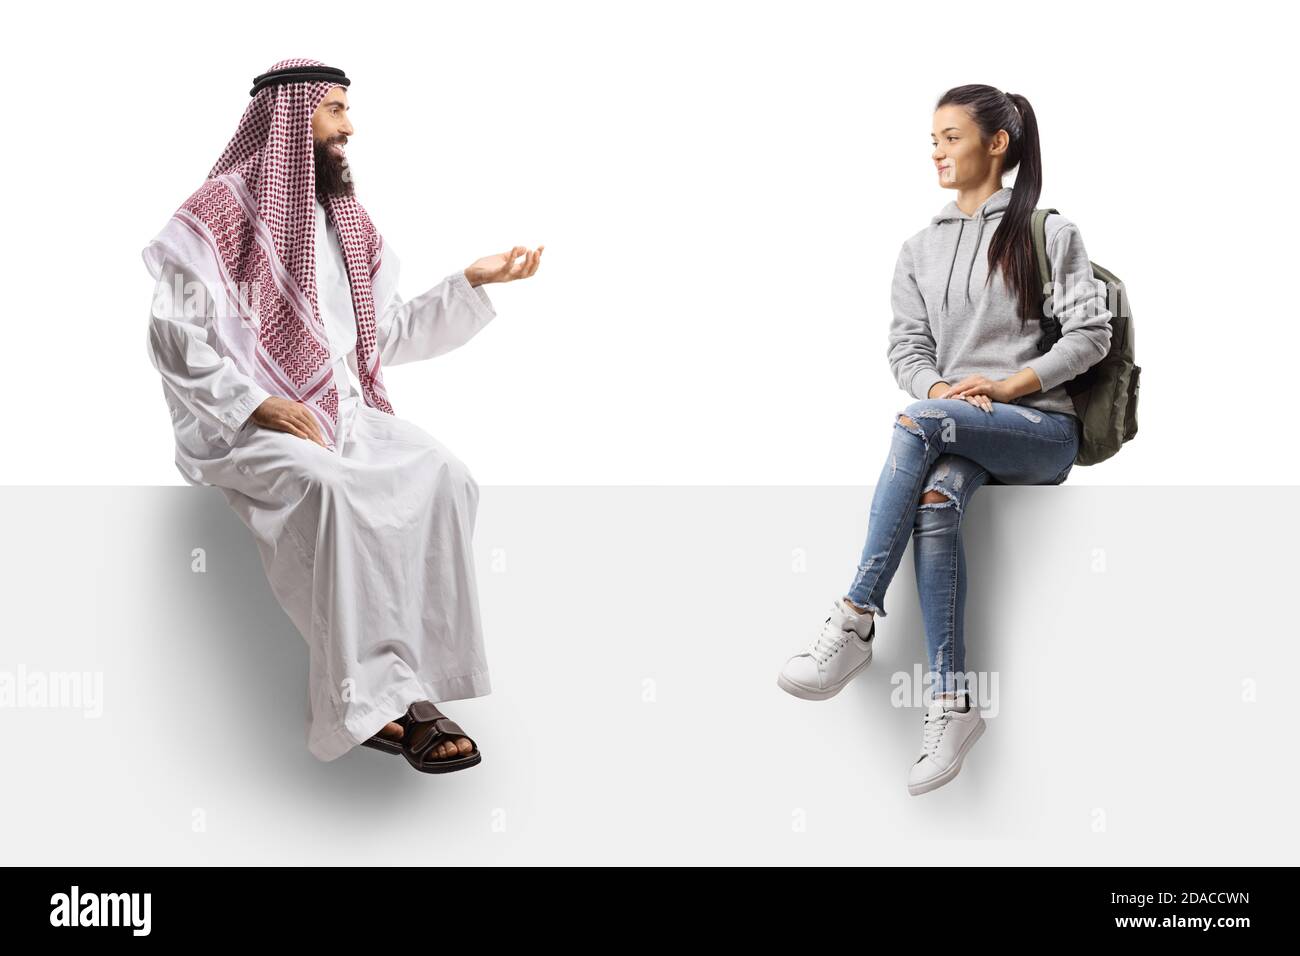 Saudi arab man and a female student sitting on a panel and talking isolated on white background Stock Photo